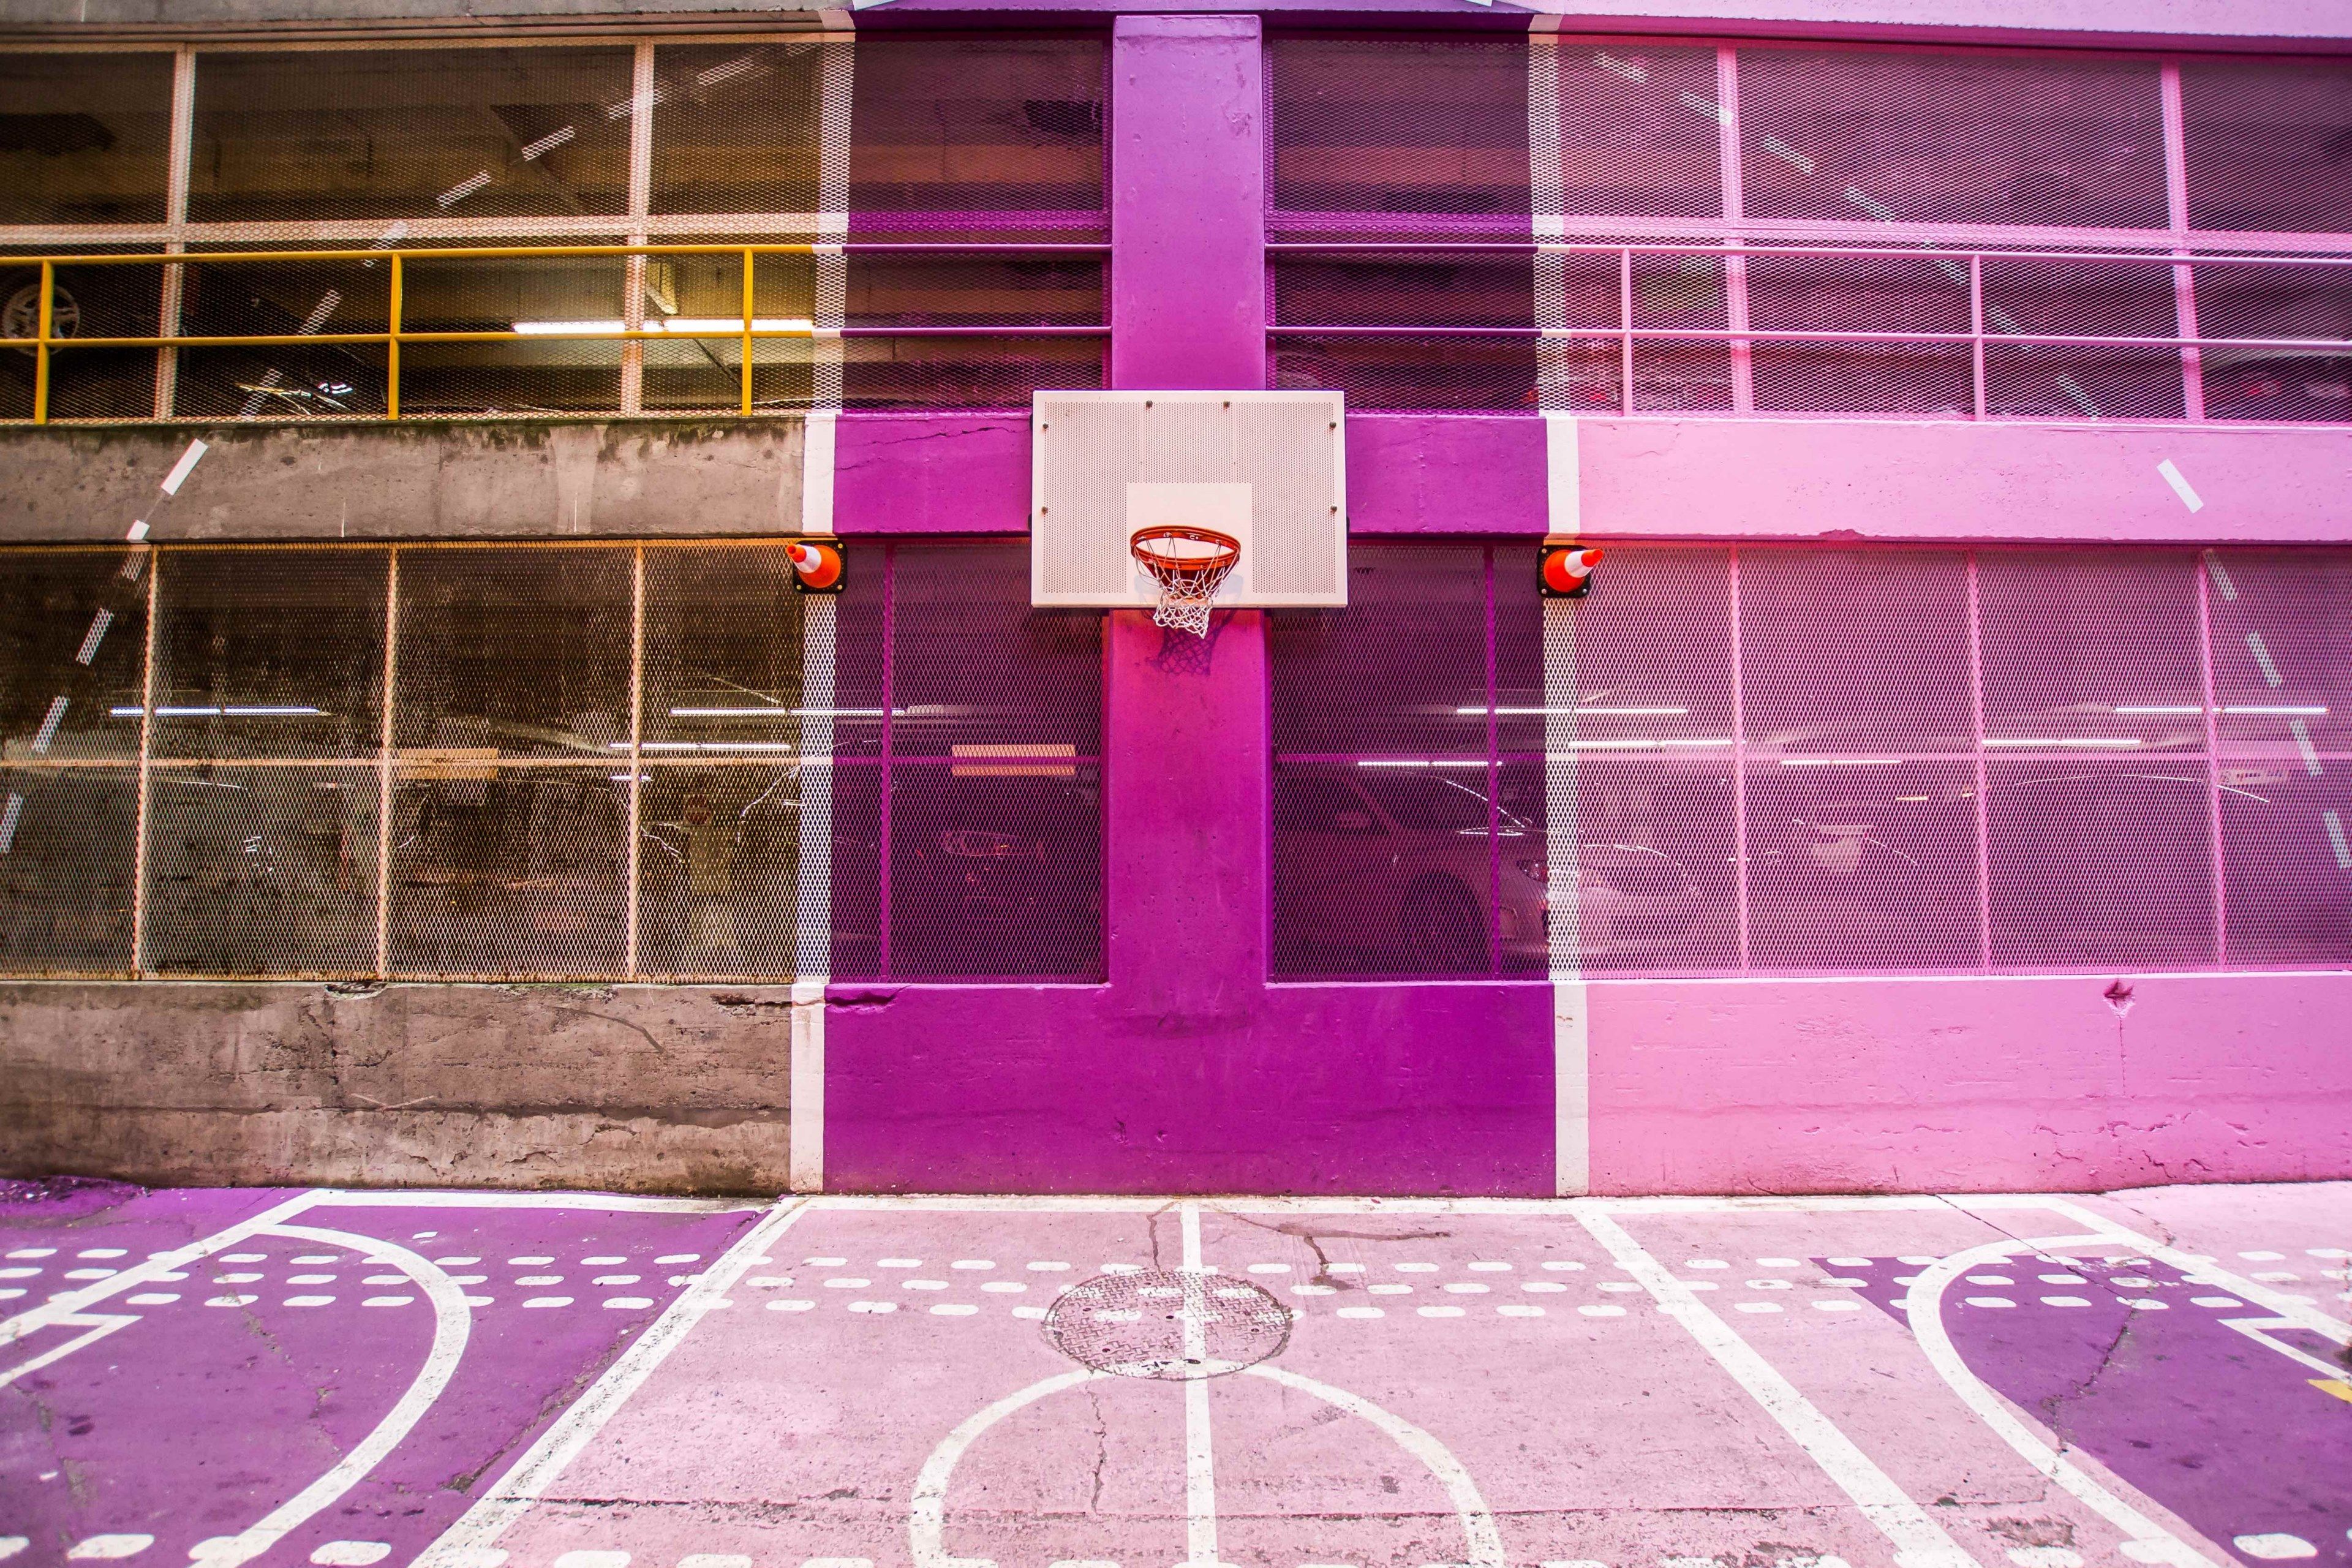 Wallpaper / a colorful pink and purple outdoor basketball court, colorful basketball 4k wallpaper